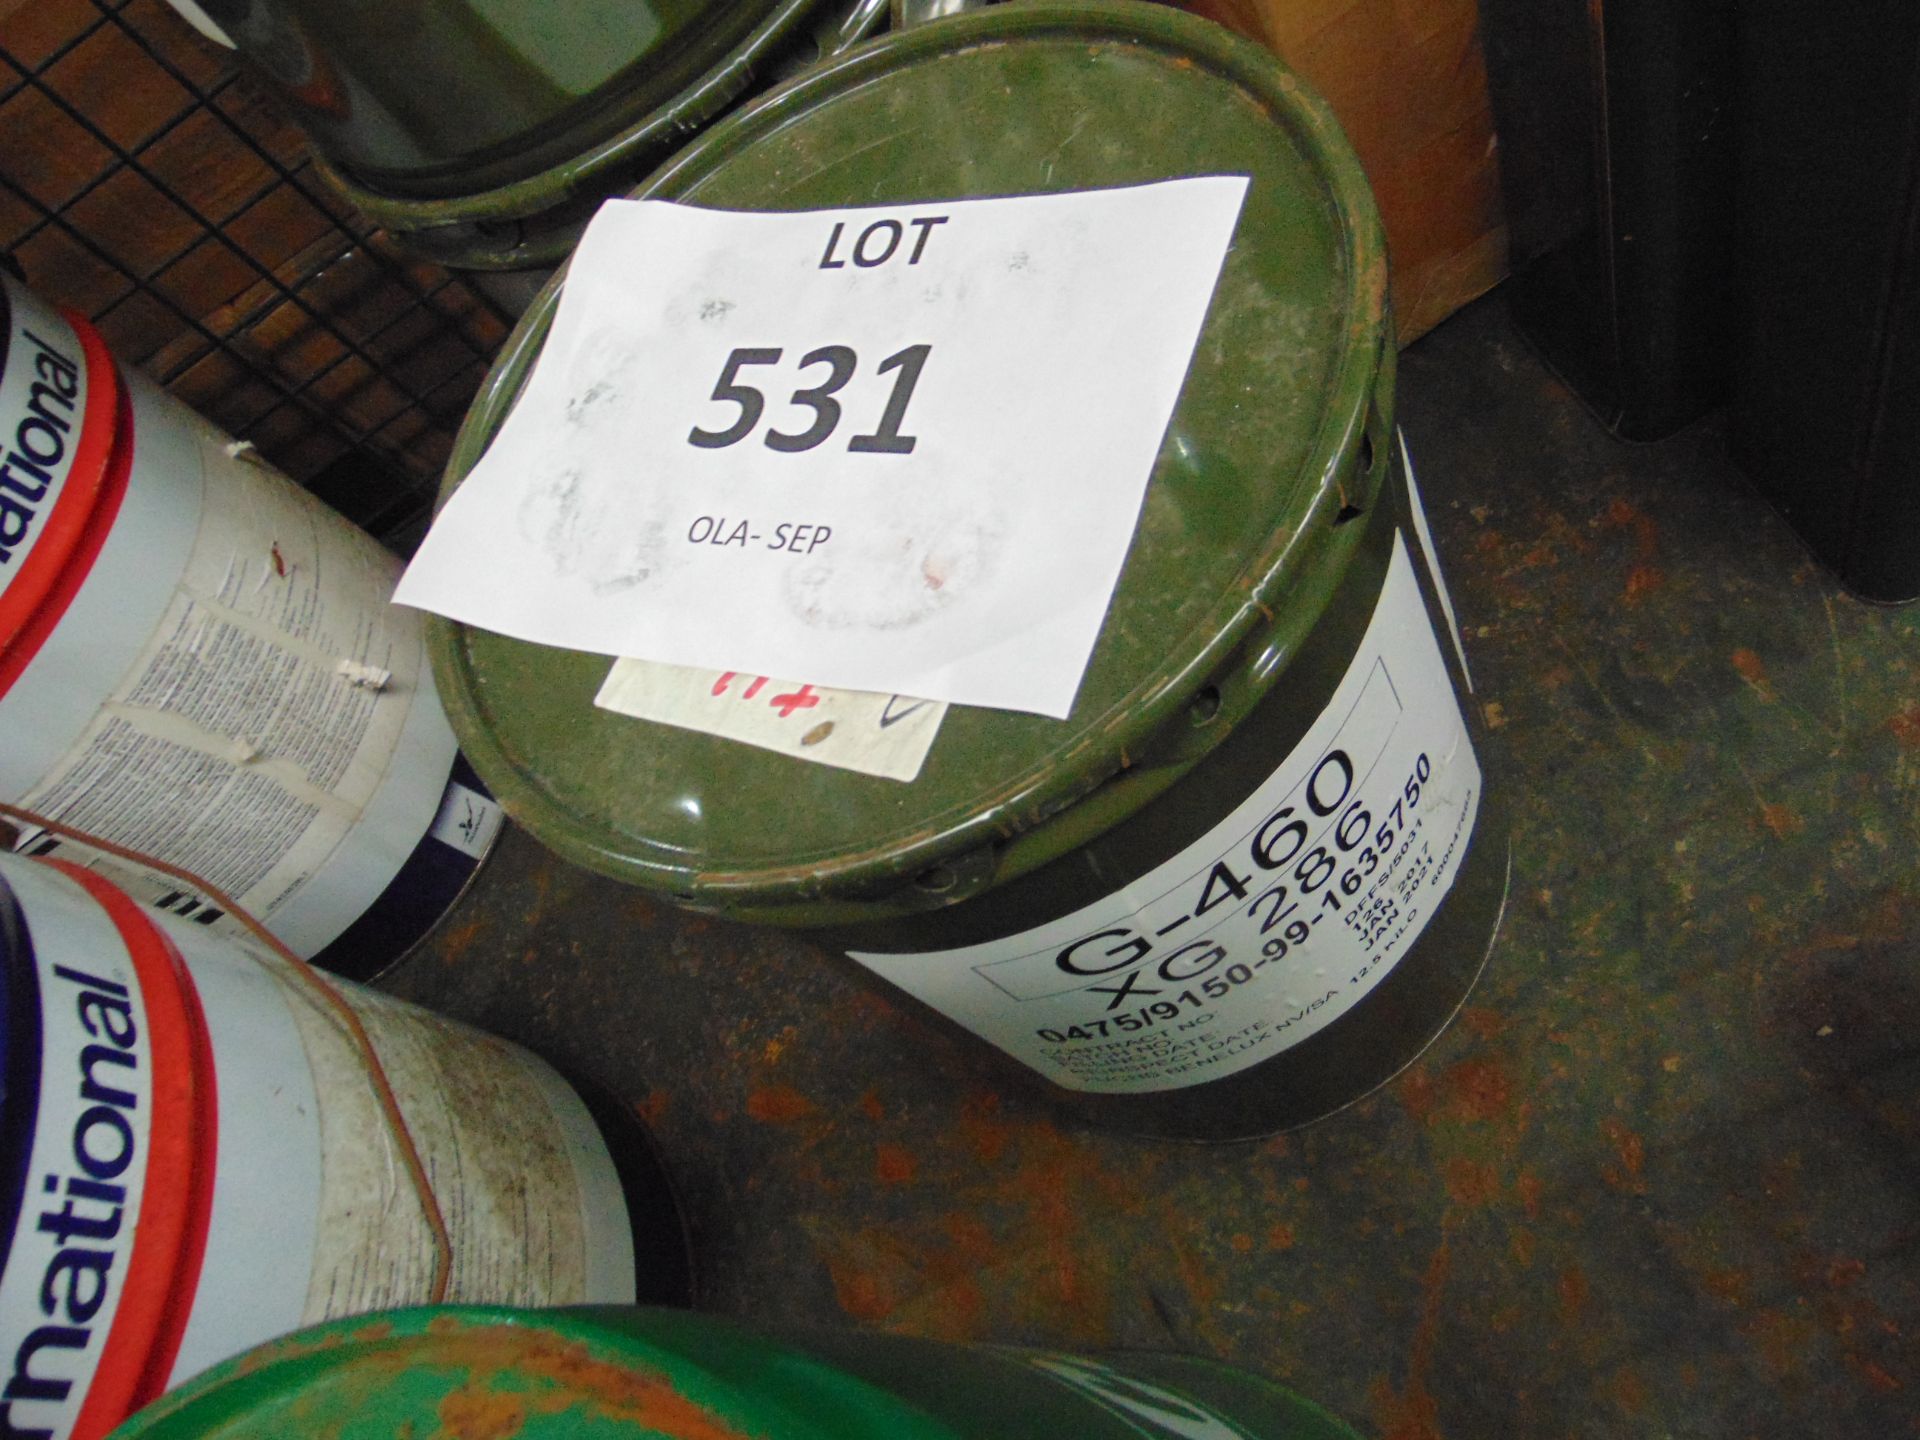 3X 12.5 KGS DRUMS OF GENERAL PURPOSE GRAPHITE GREASE XG 286 SUITABLE FOR AIRCRAFT, VEHICLES, ETC. - Image 2 of 3